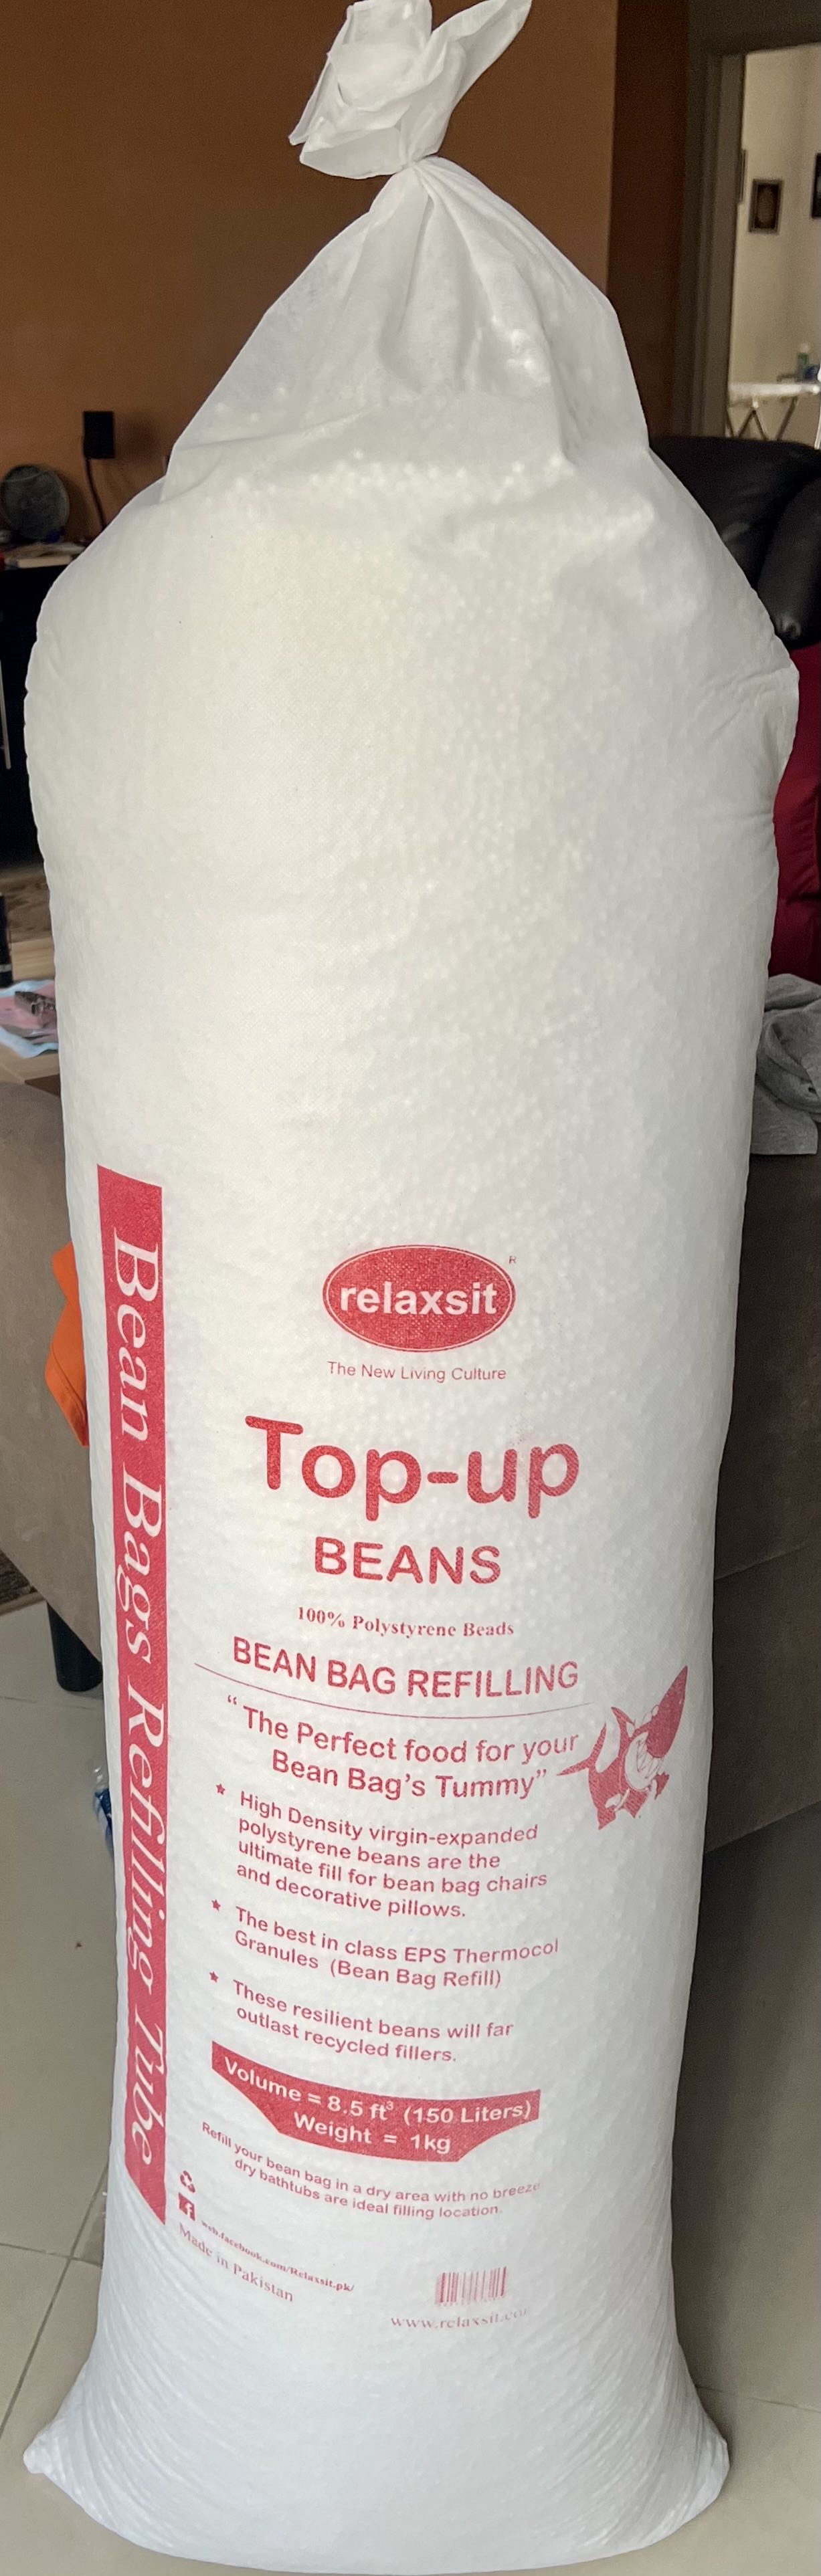 Thermocol Beads for Bean Bags, EPS Thermocol Beans offered by